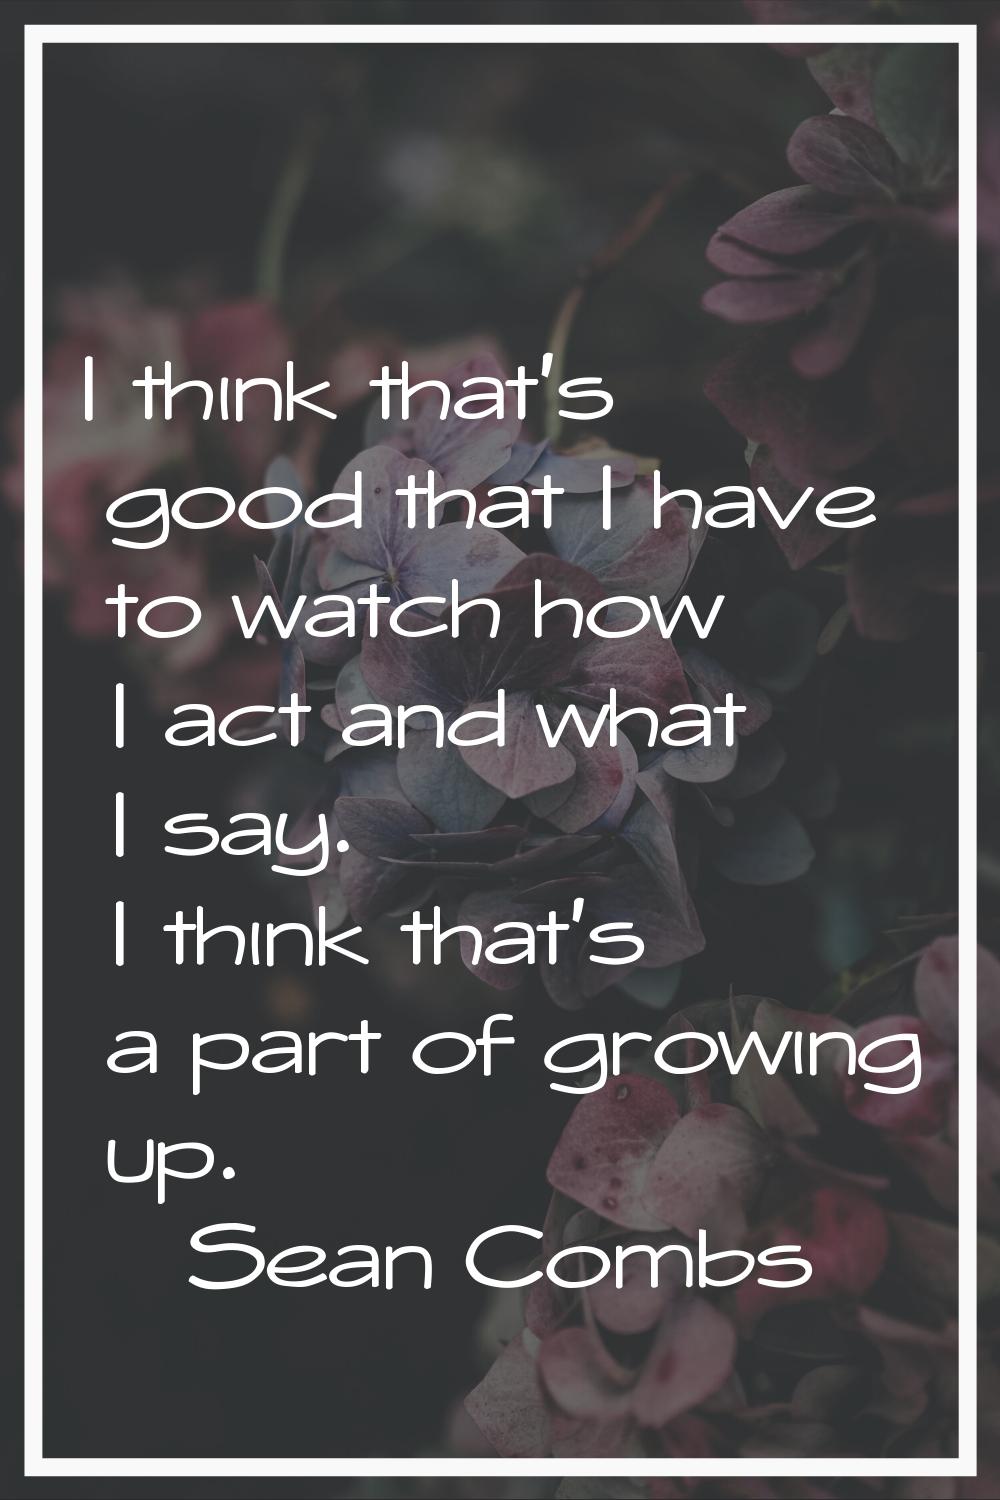 I think that's good that I have to watch how I act and what I say. I think that's a part of growing